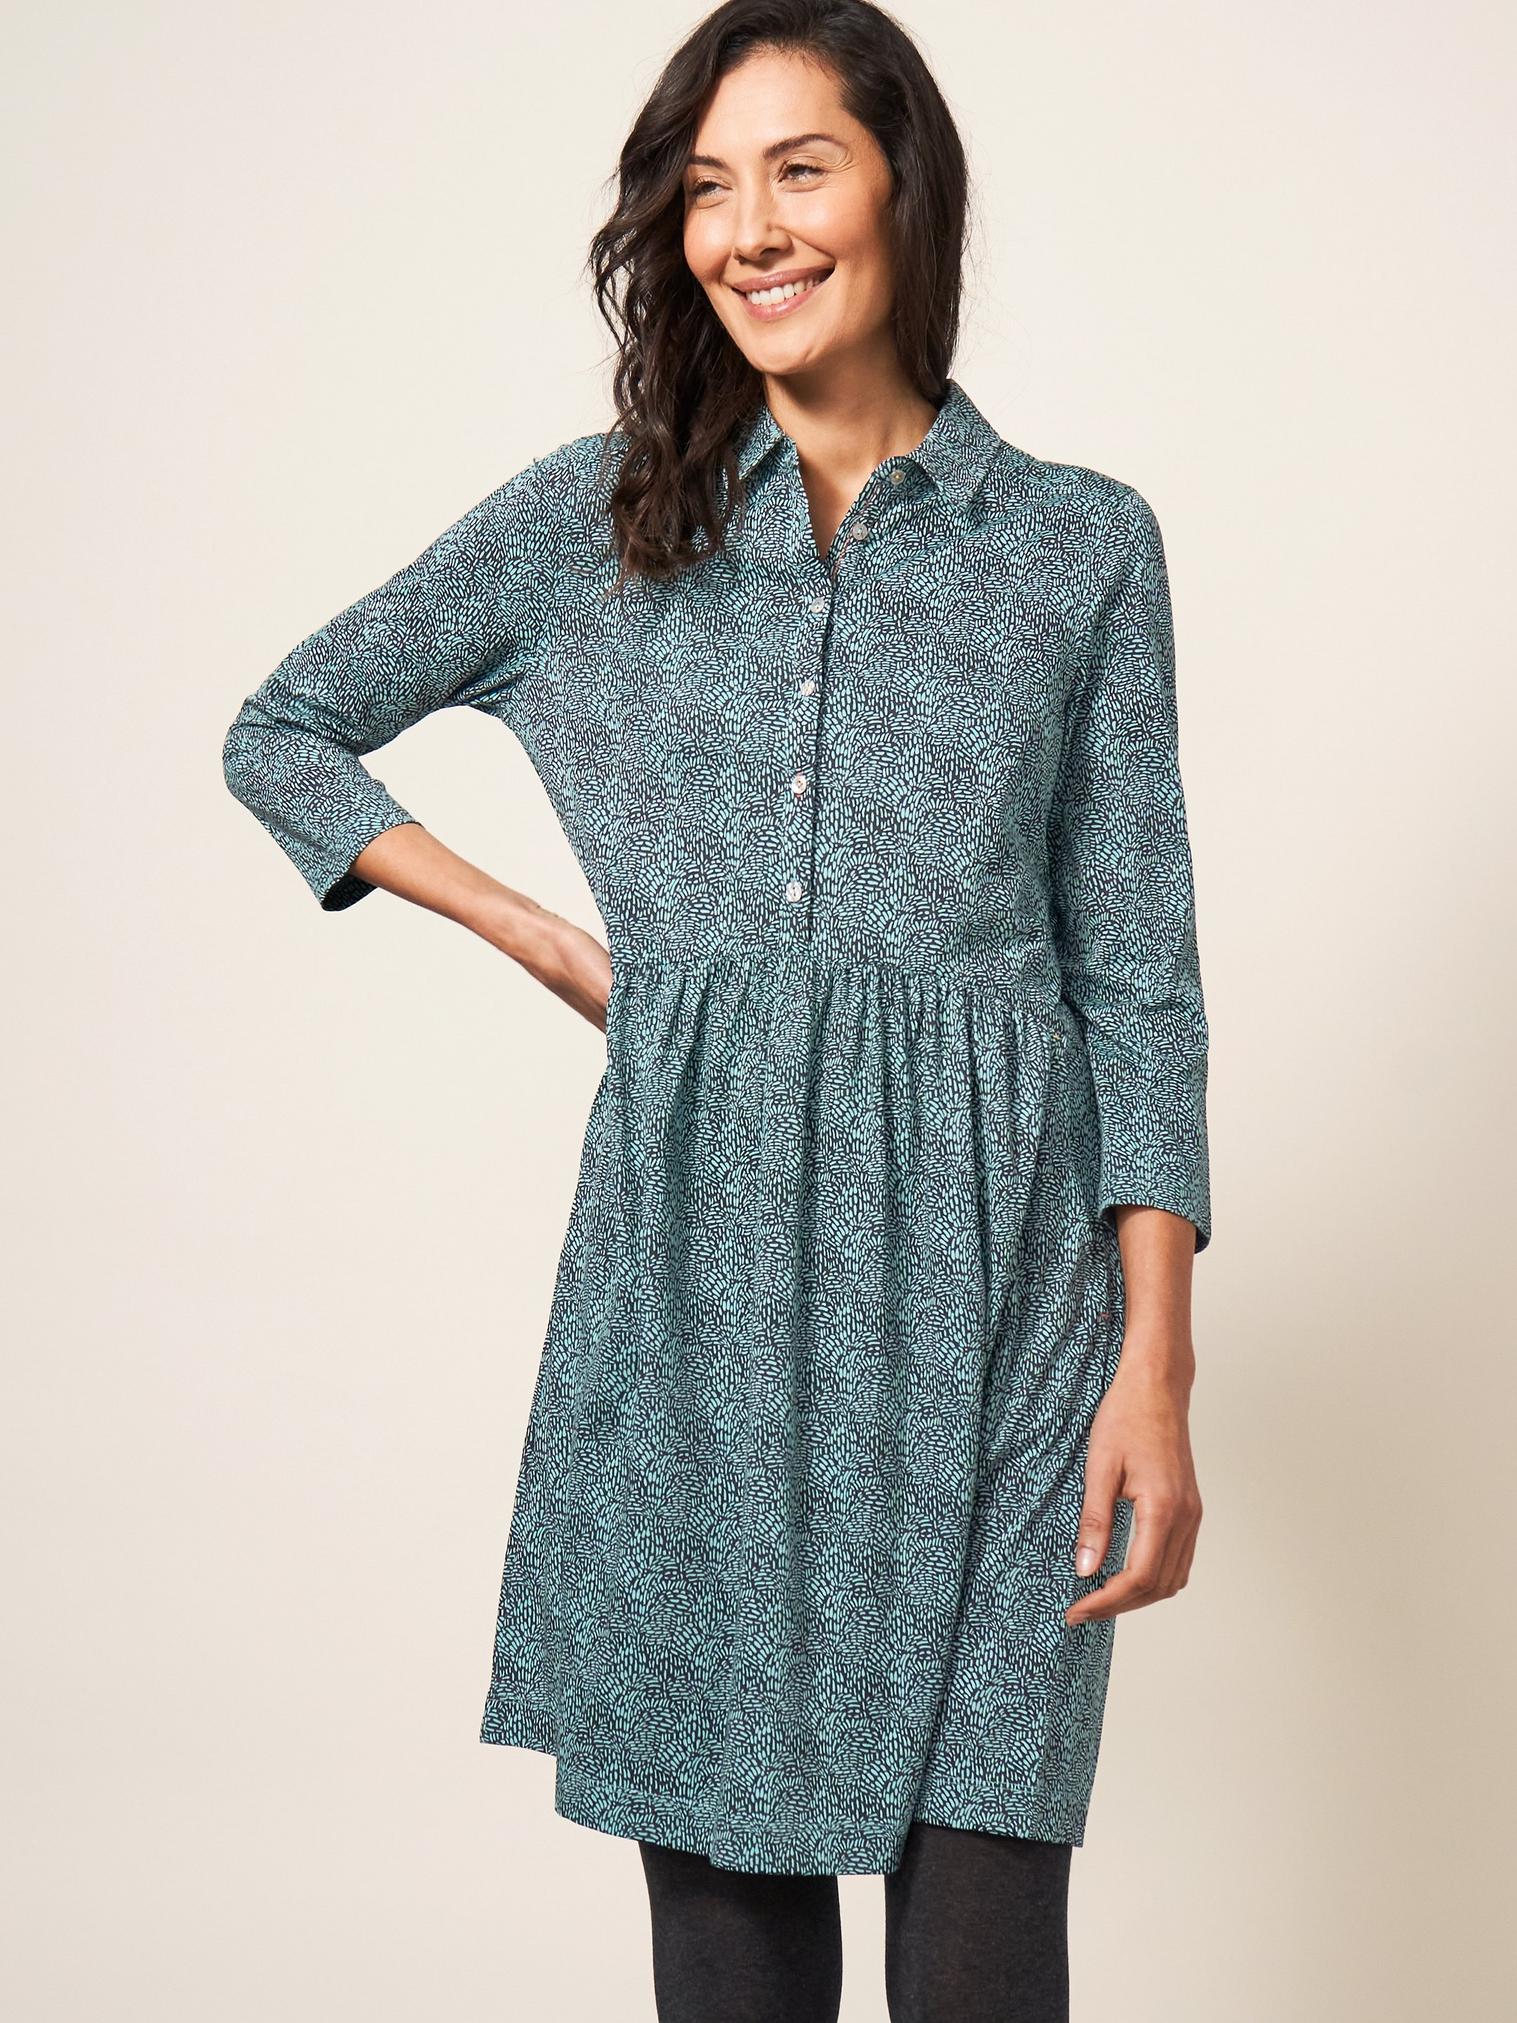 Everly Jersey Dress in TEAL MLT - LIFESTYLE